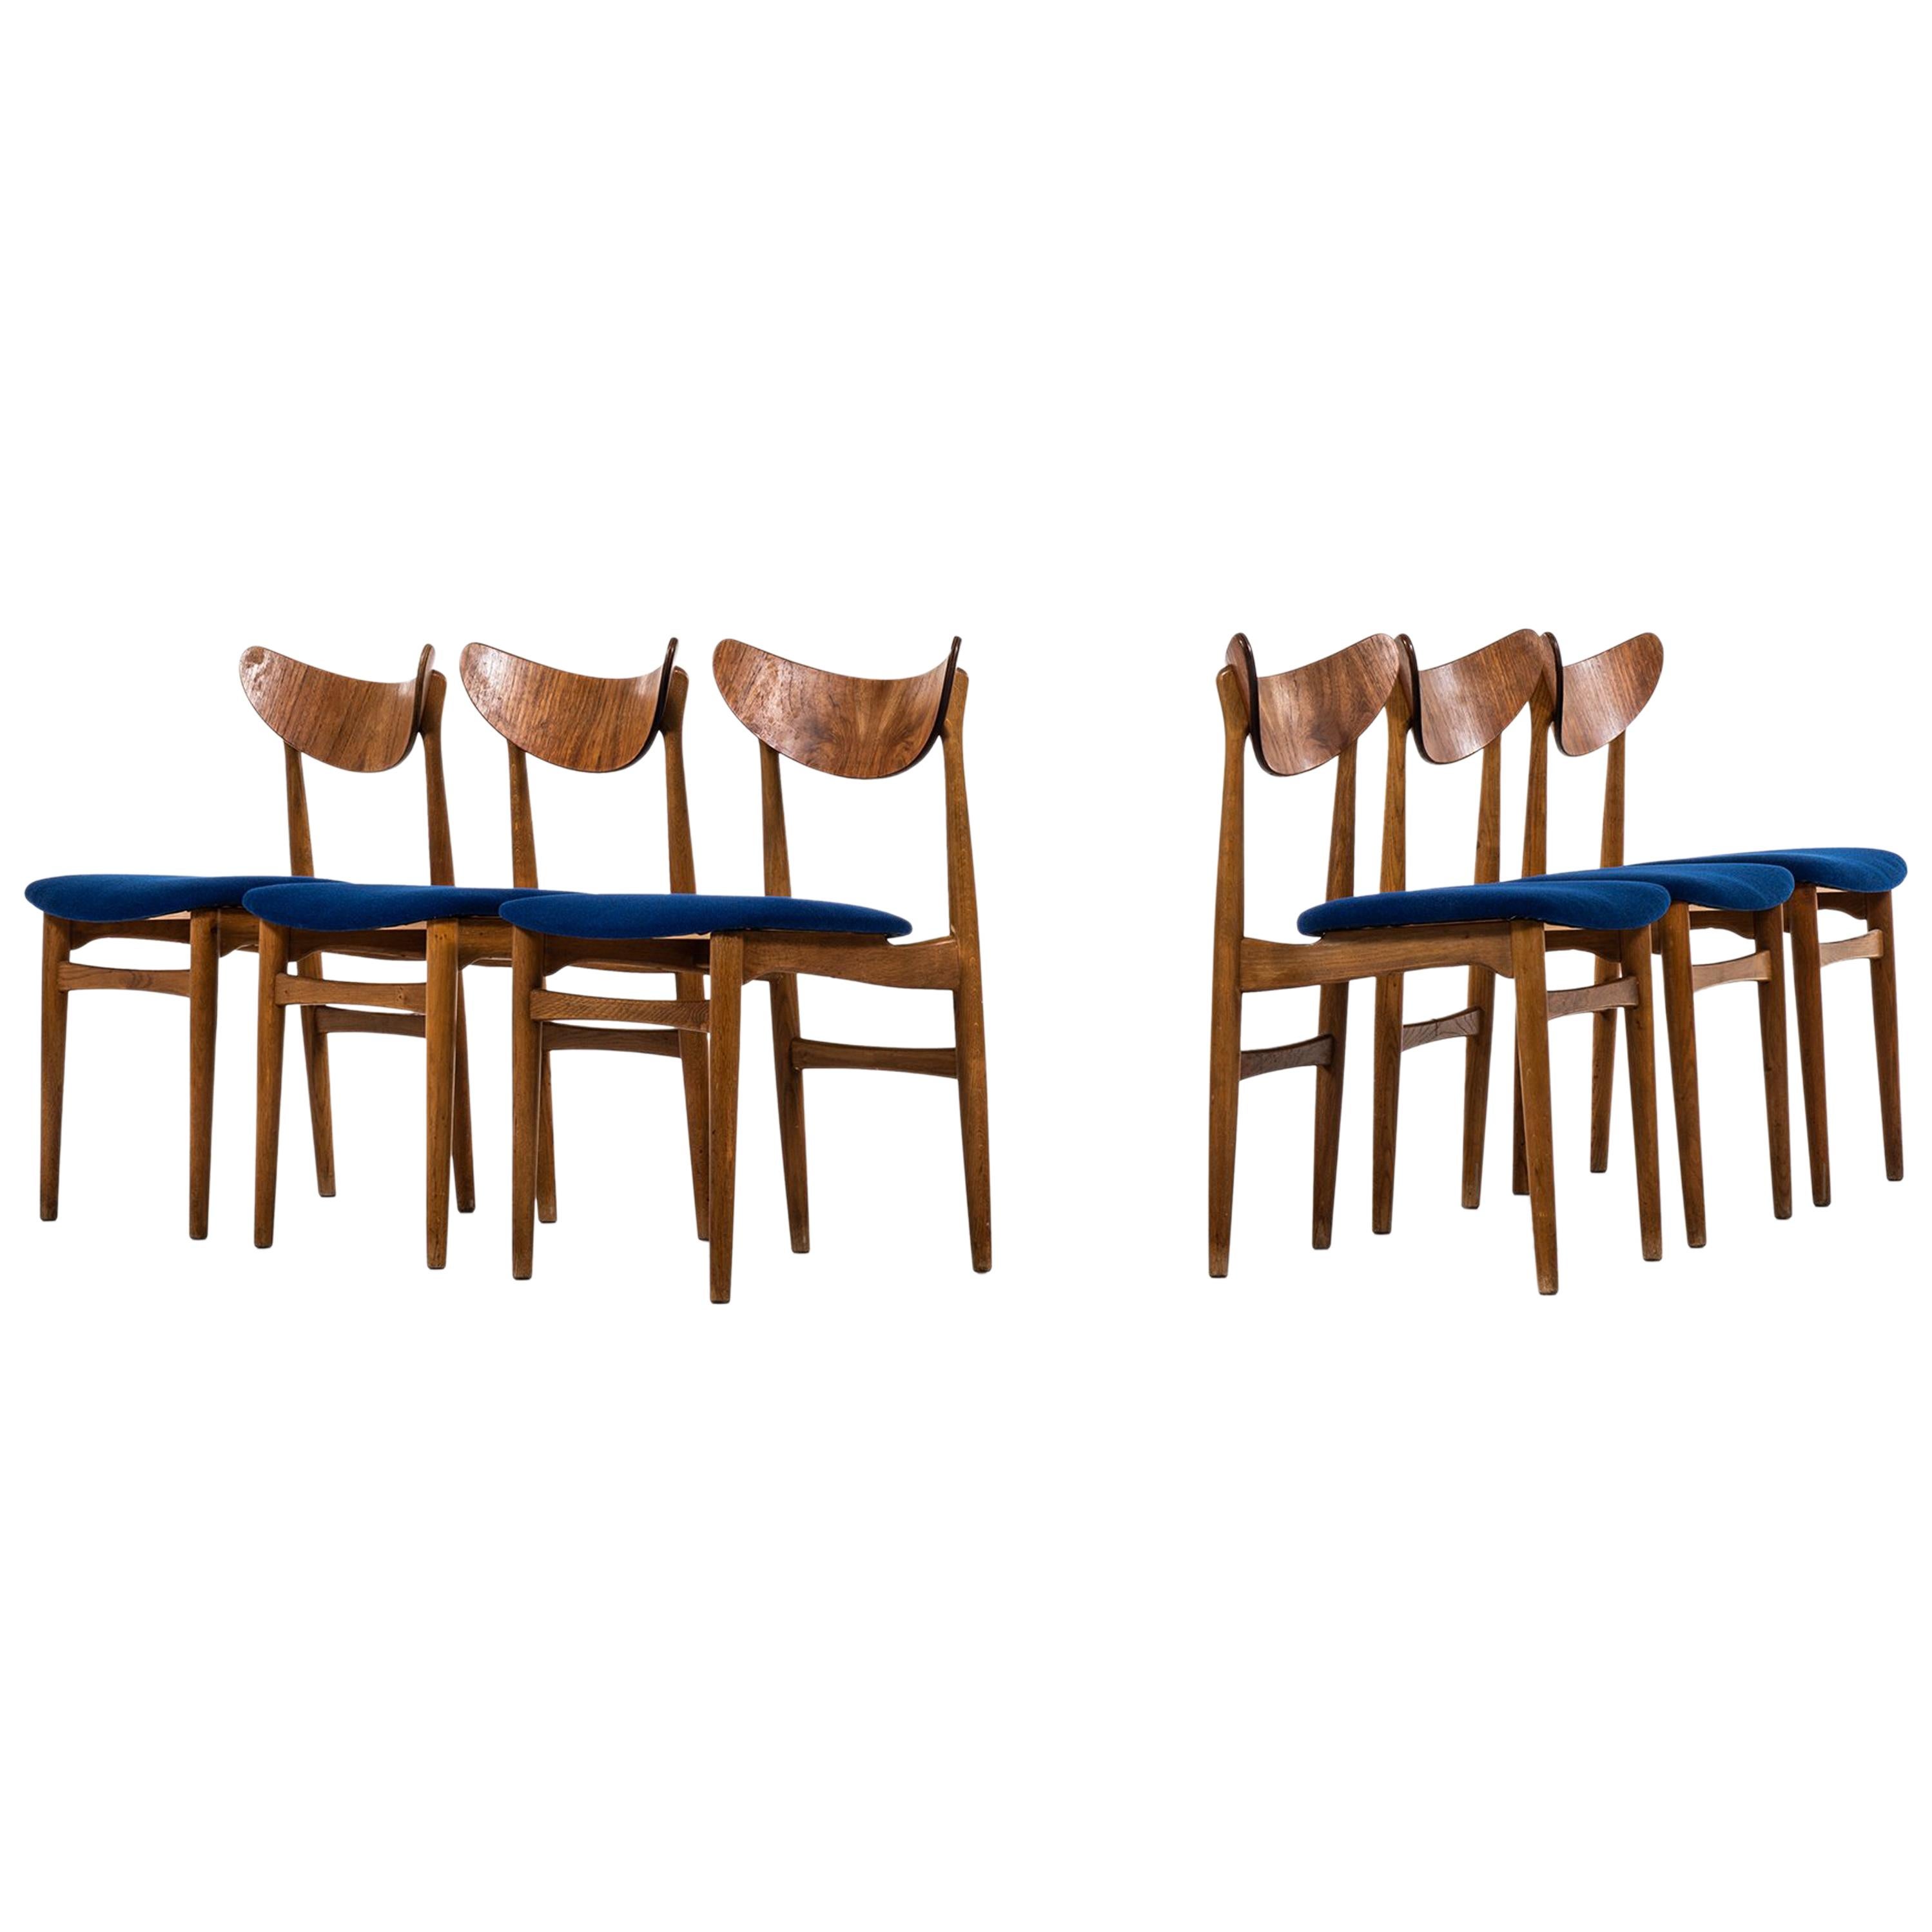 Set of Six Dining Chairs in Oak, Teak and Blue Fabric Produced in Denmark For Sale